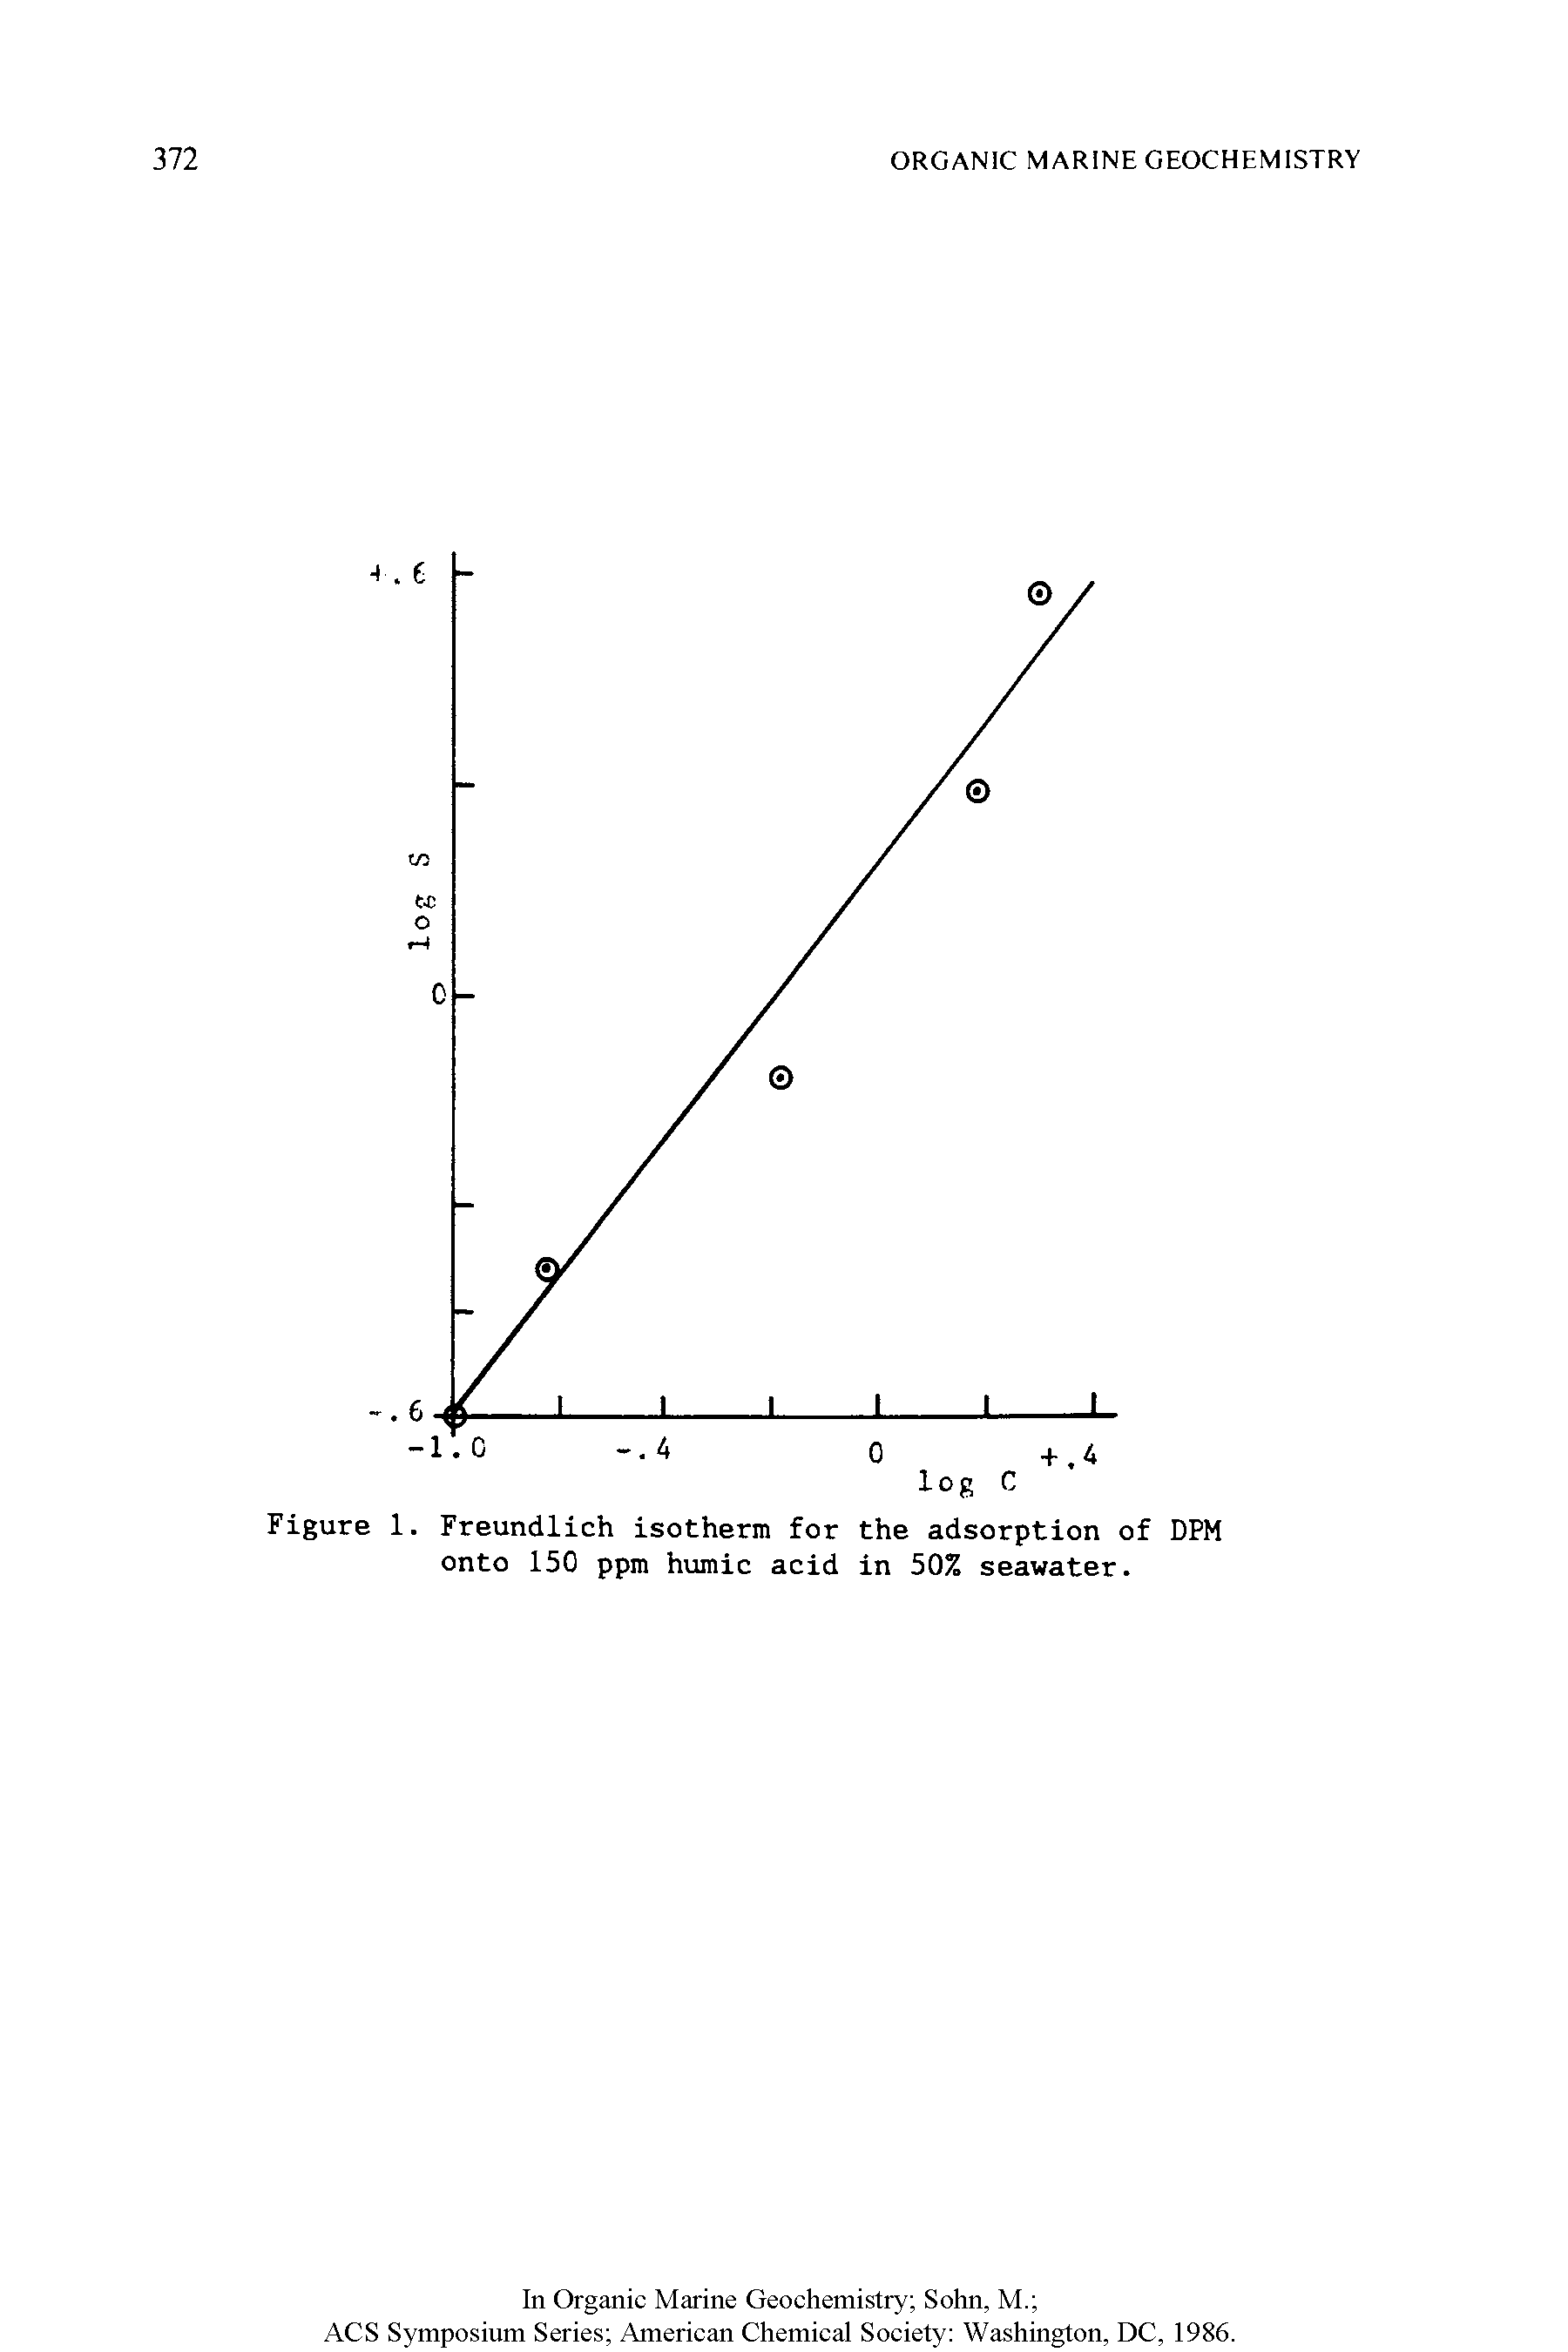 Figure 1. Freundlich isotherm for the adsorption of DPM onto 150 ppm humic acid in 50% seawater.